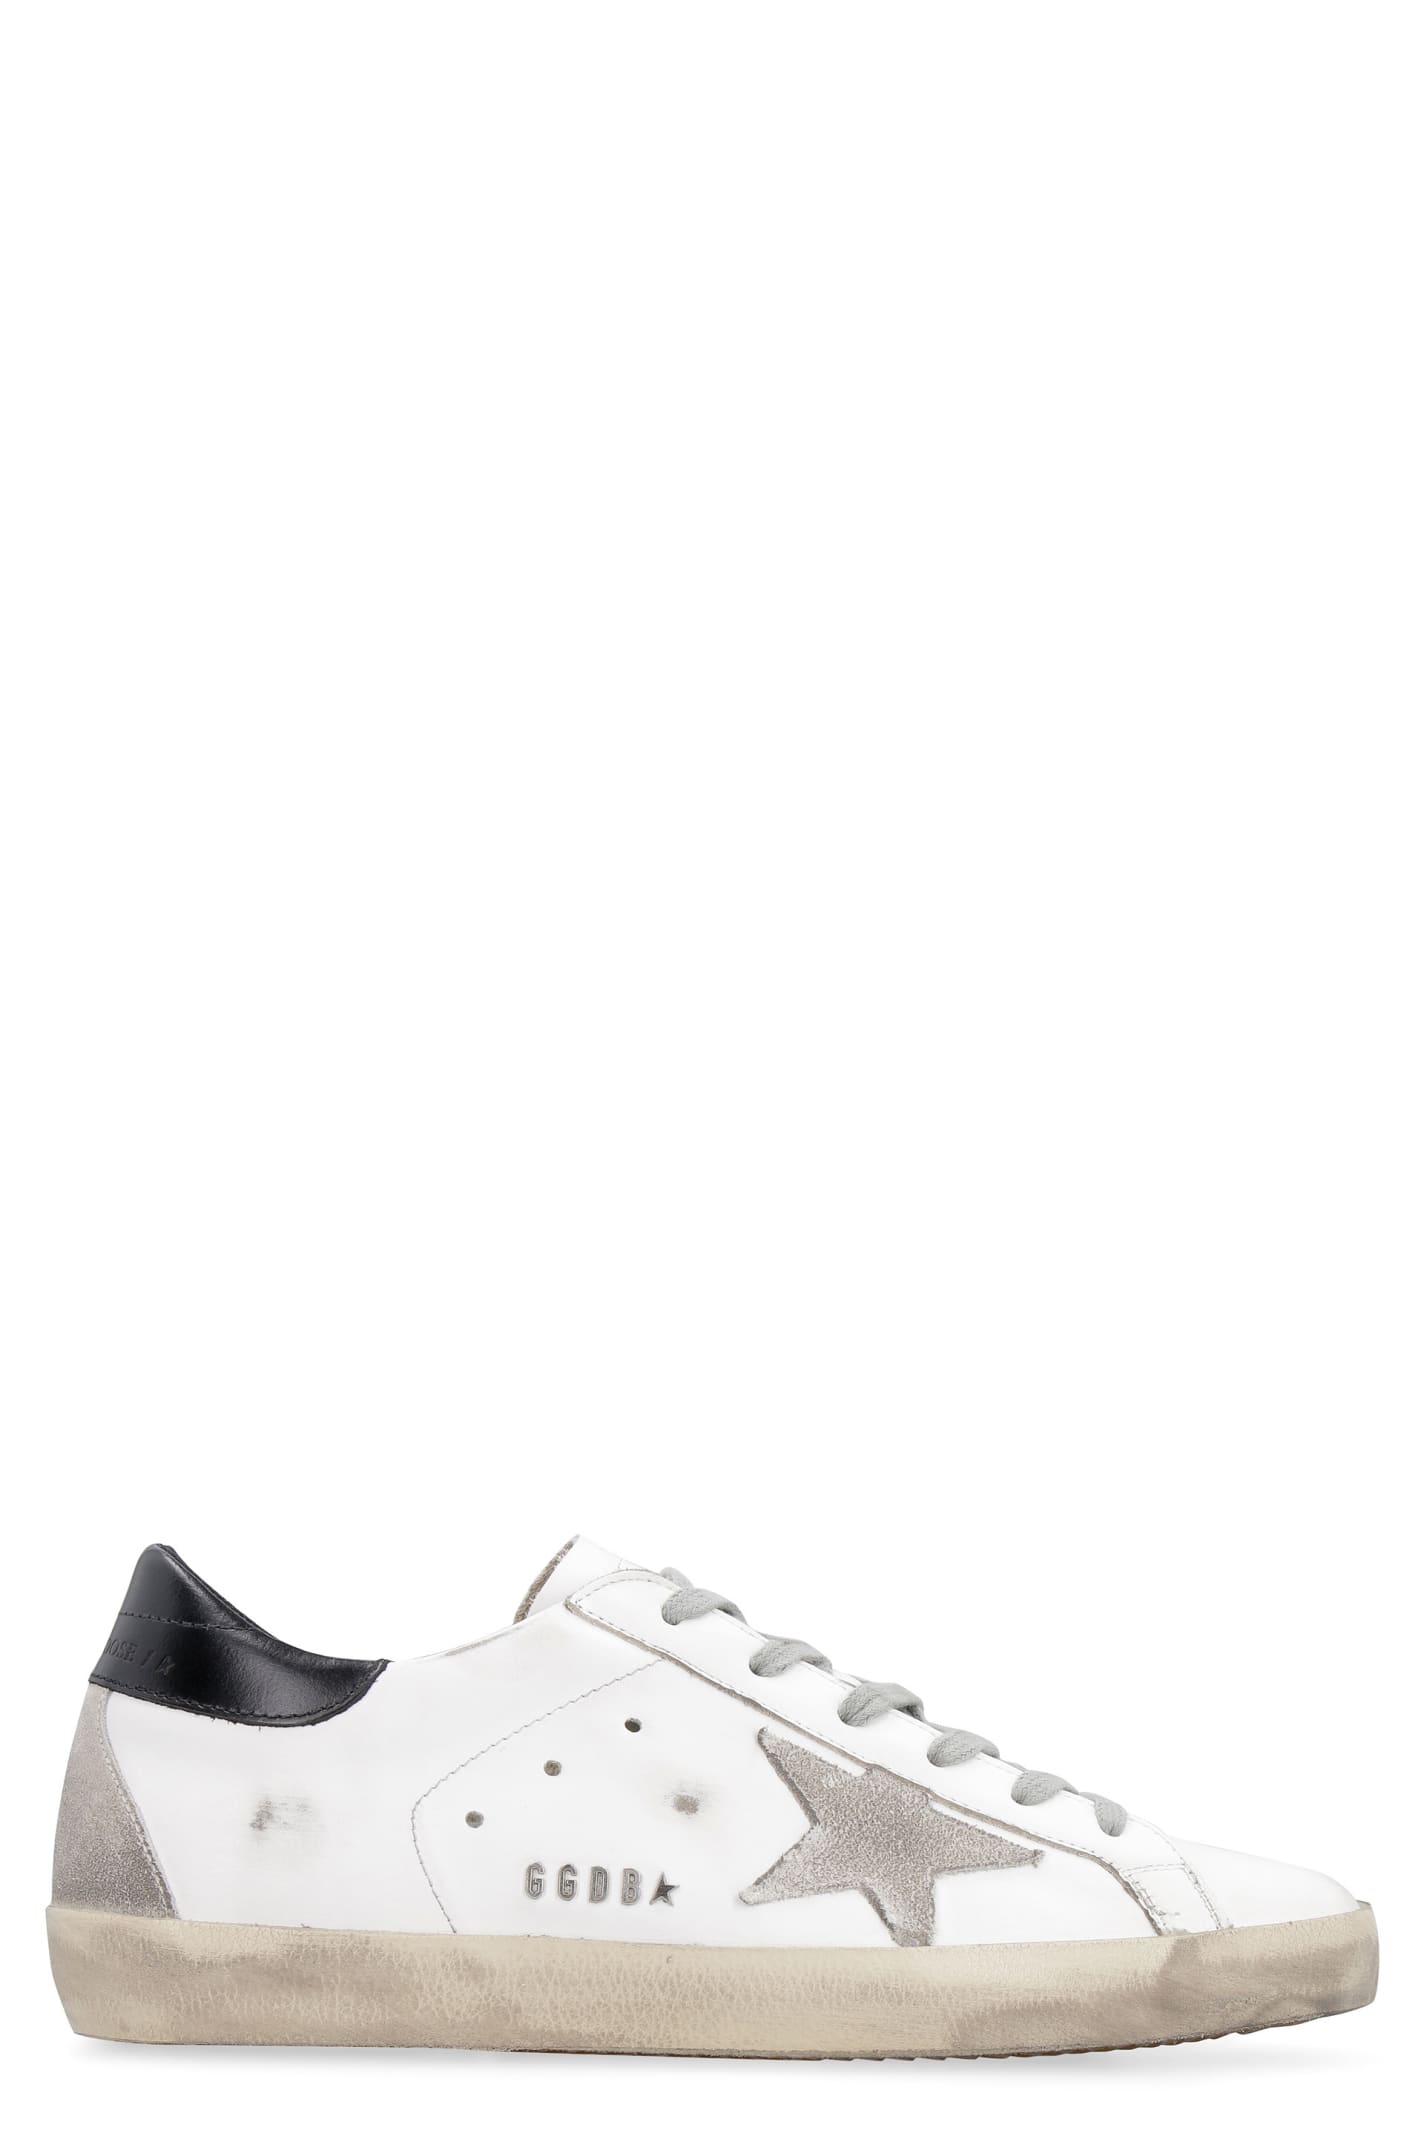 Golden Goose Superstar Classic Leather Sneakers In White